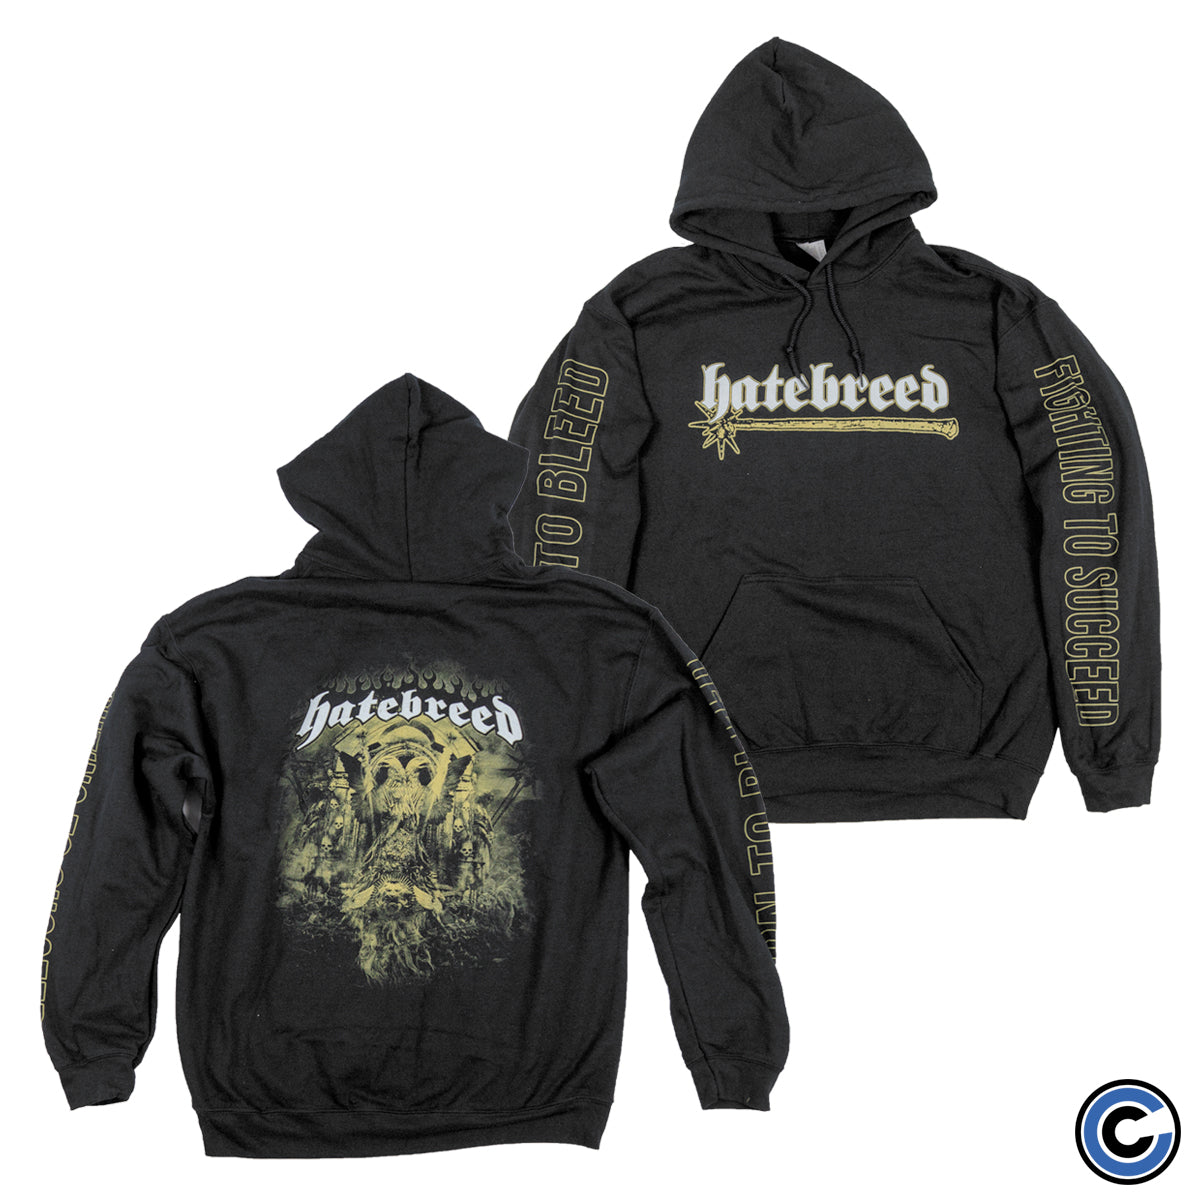 Hatebreed "In Ashes They Shall Reap" Hoodie